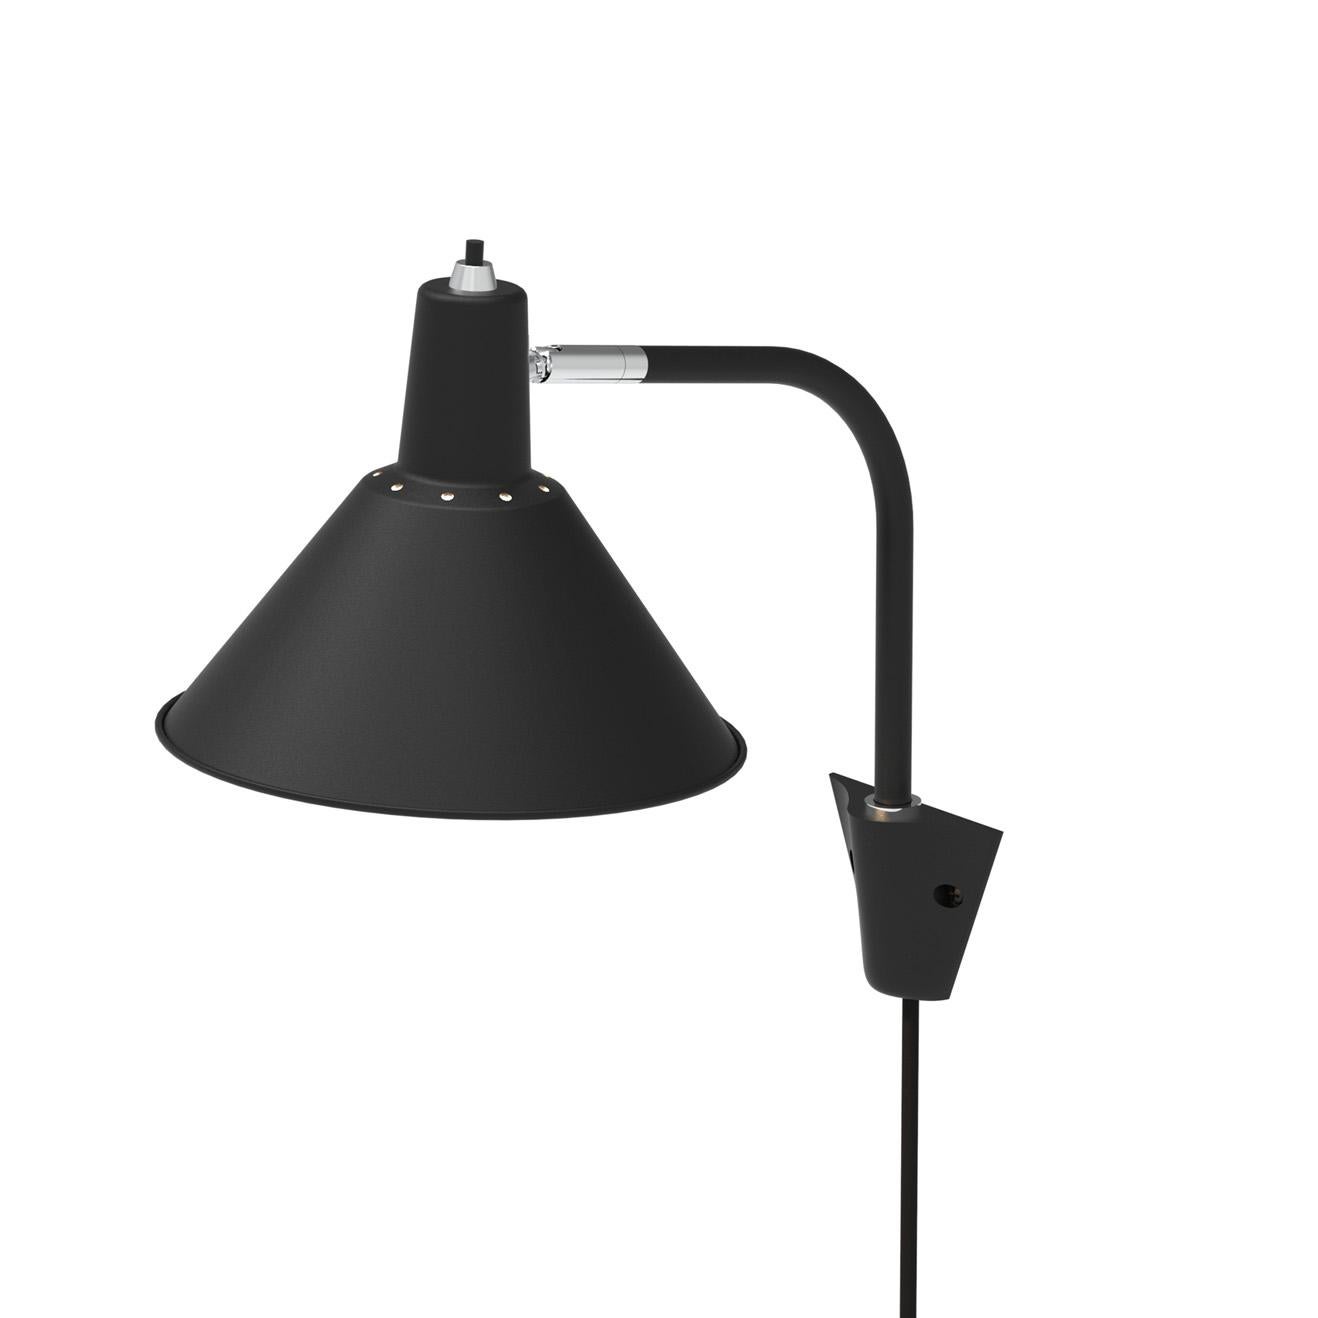 Arcon Wall Lamp in Black/Chrome - By NUAD In New Condition For Sale In Tureby, DK